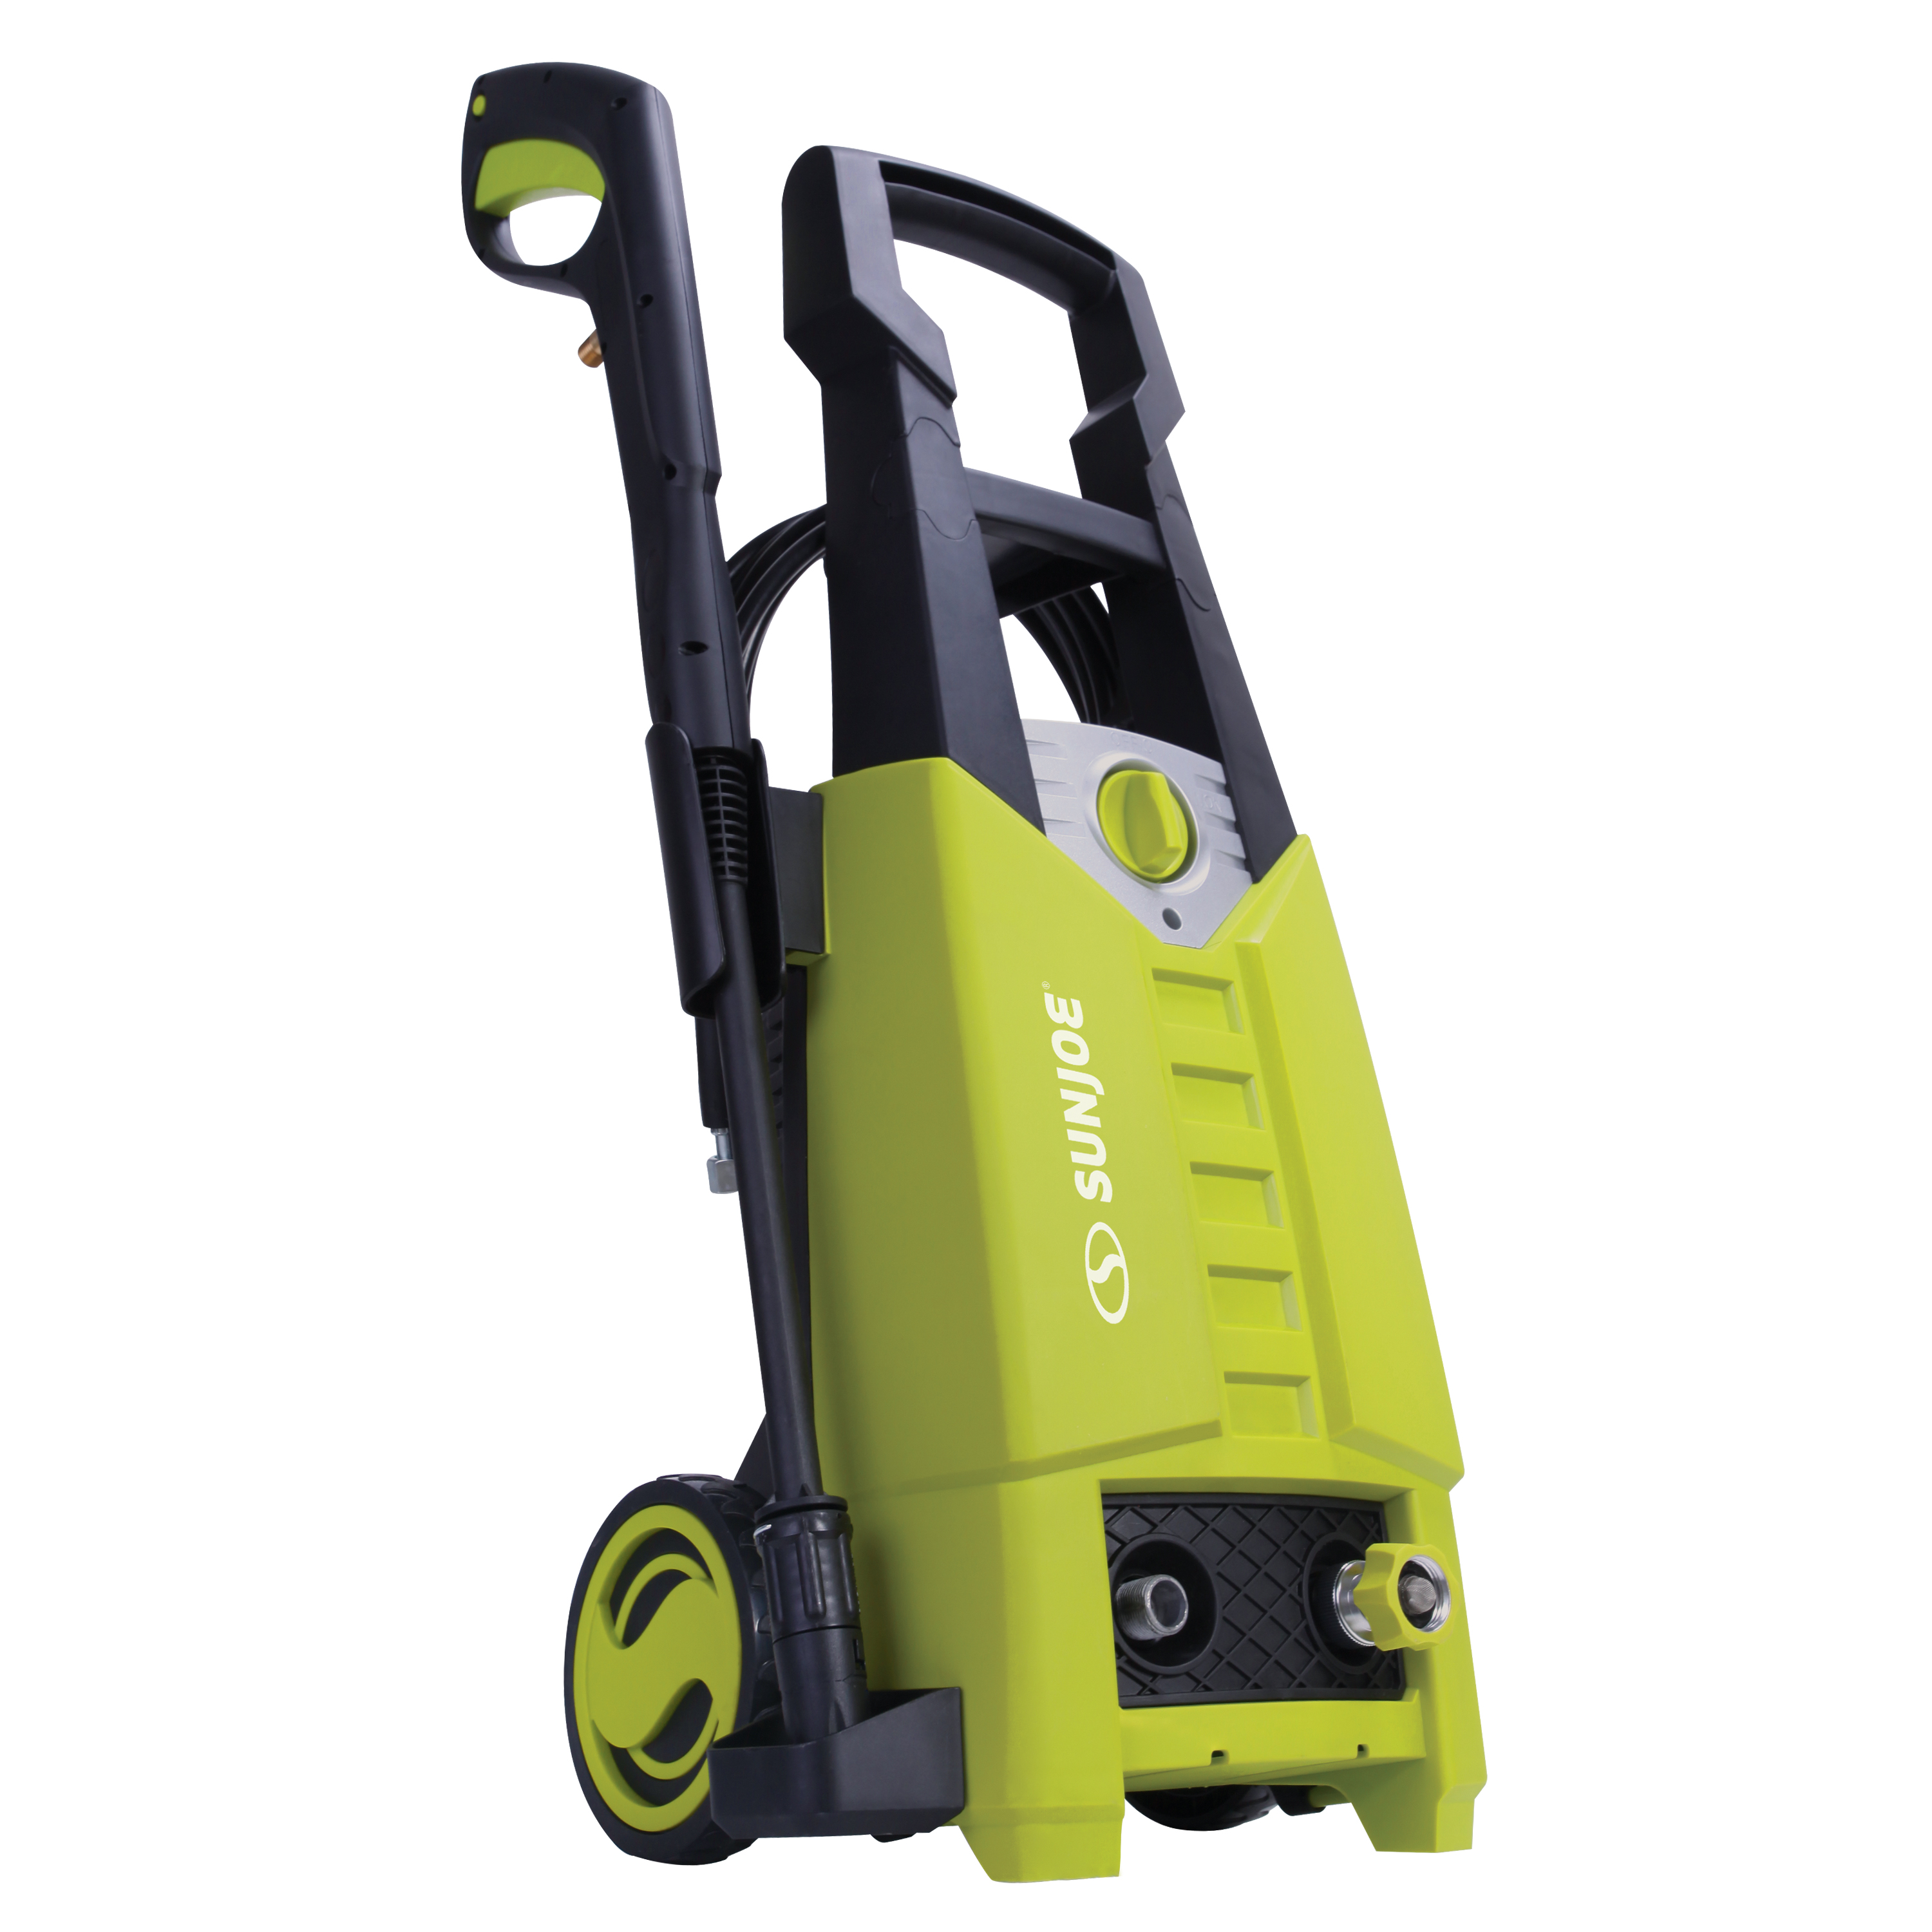 Sun Joe SPX2597 Electric Pressure Washer with Variable Control Lance, 14.5-Amp, Adjustable Wand - image 4 of 6